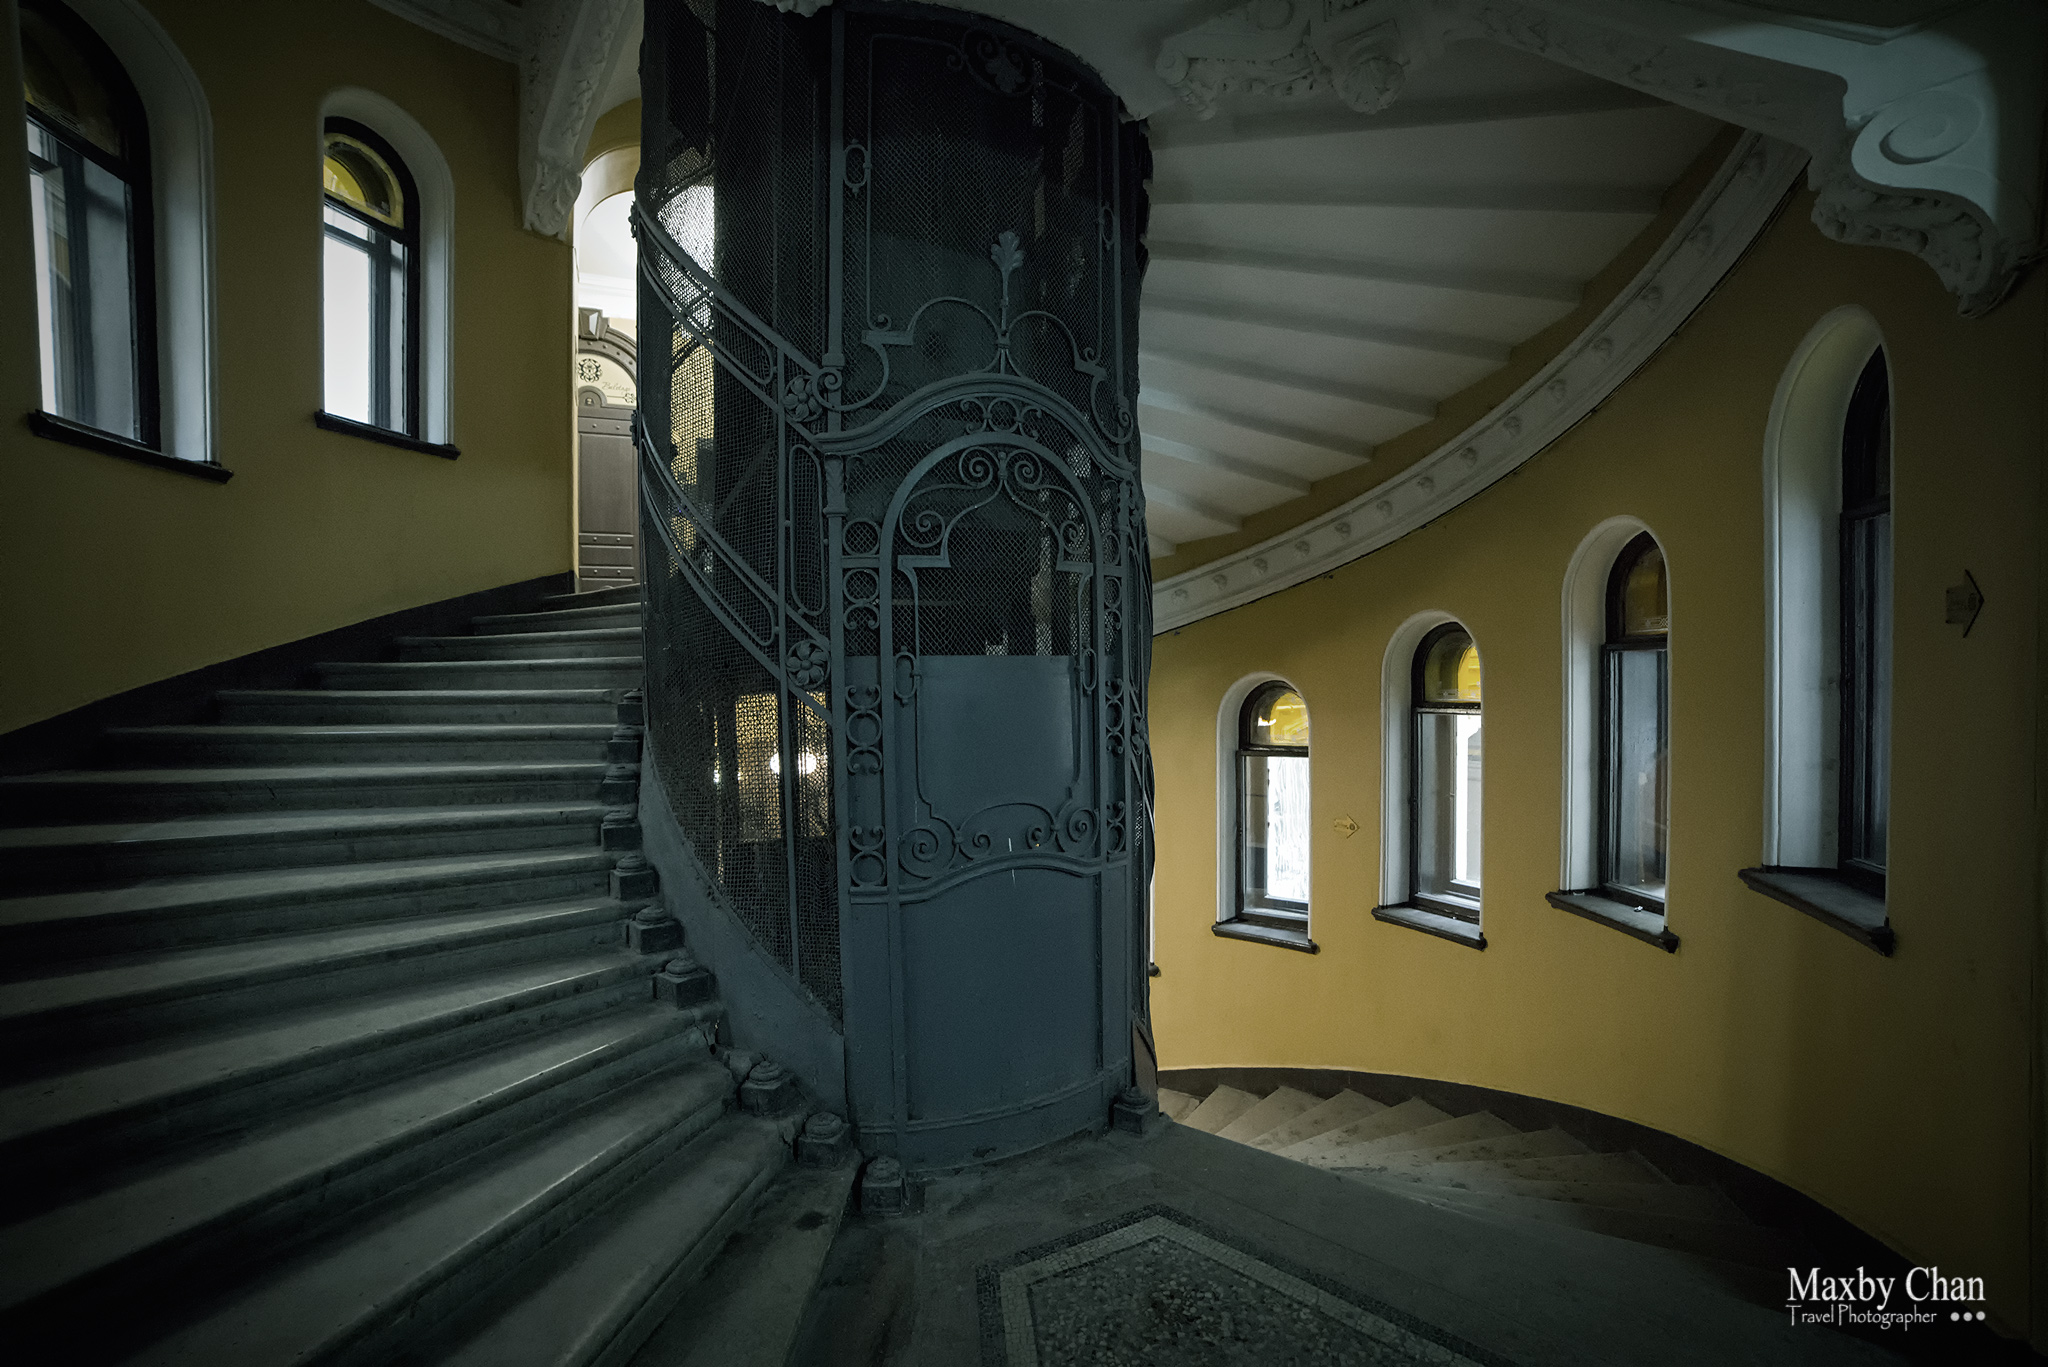 A common spiral staircase with a lift at the central core.